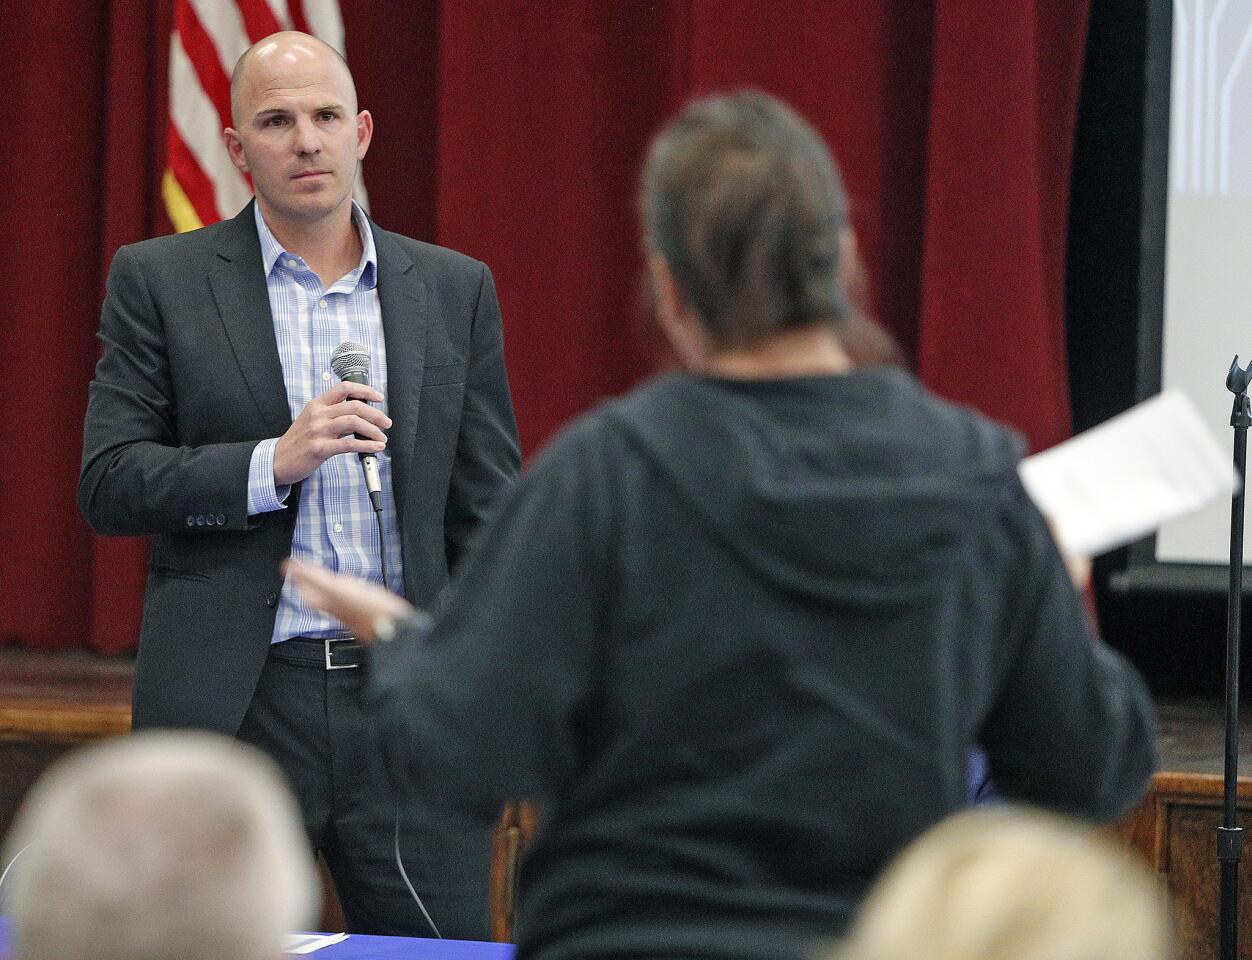 Burbank Unified School District Superintendent Matt Hill listens to comments from parent K.C. Johnson, of Burbank with two children currently at Walt Disney Elementary School, who is speaking about her displeasure for the changes to the plans at a town hall discussion with him about school renovations on Tuesday, November 13, 2018. Parents in attendance were mostly in agreement more space is needed, and comments ranged from complete displeasure with the process to brainstorming for solutions to the lack of space.